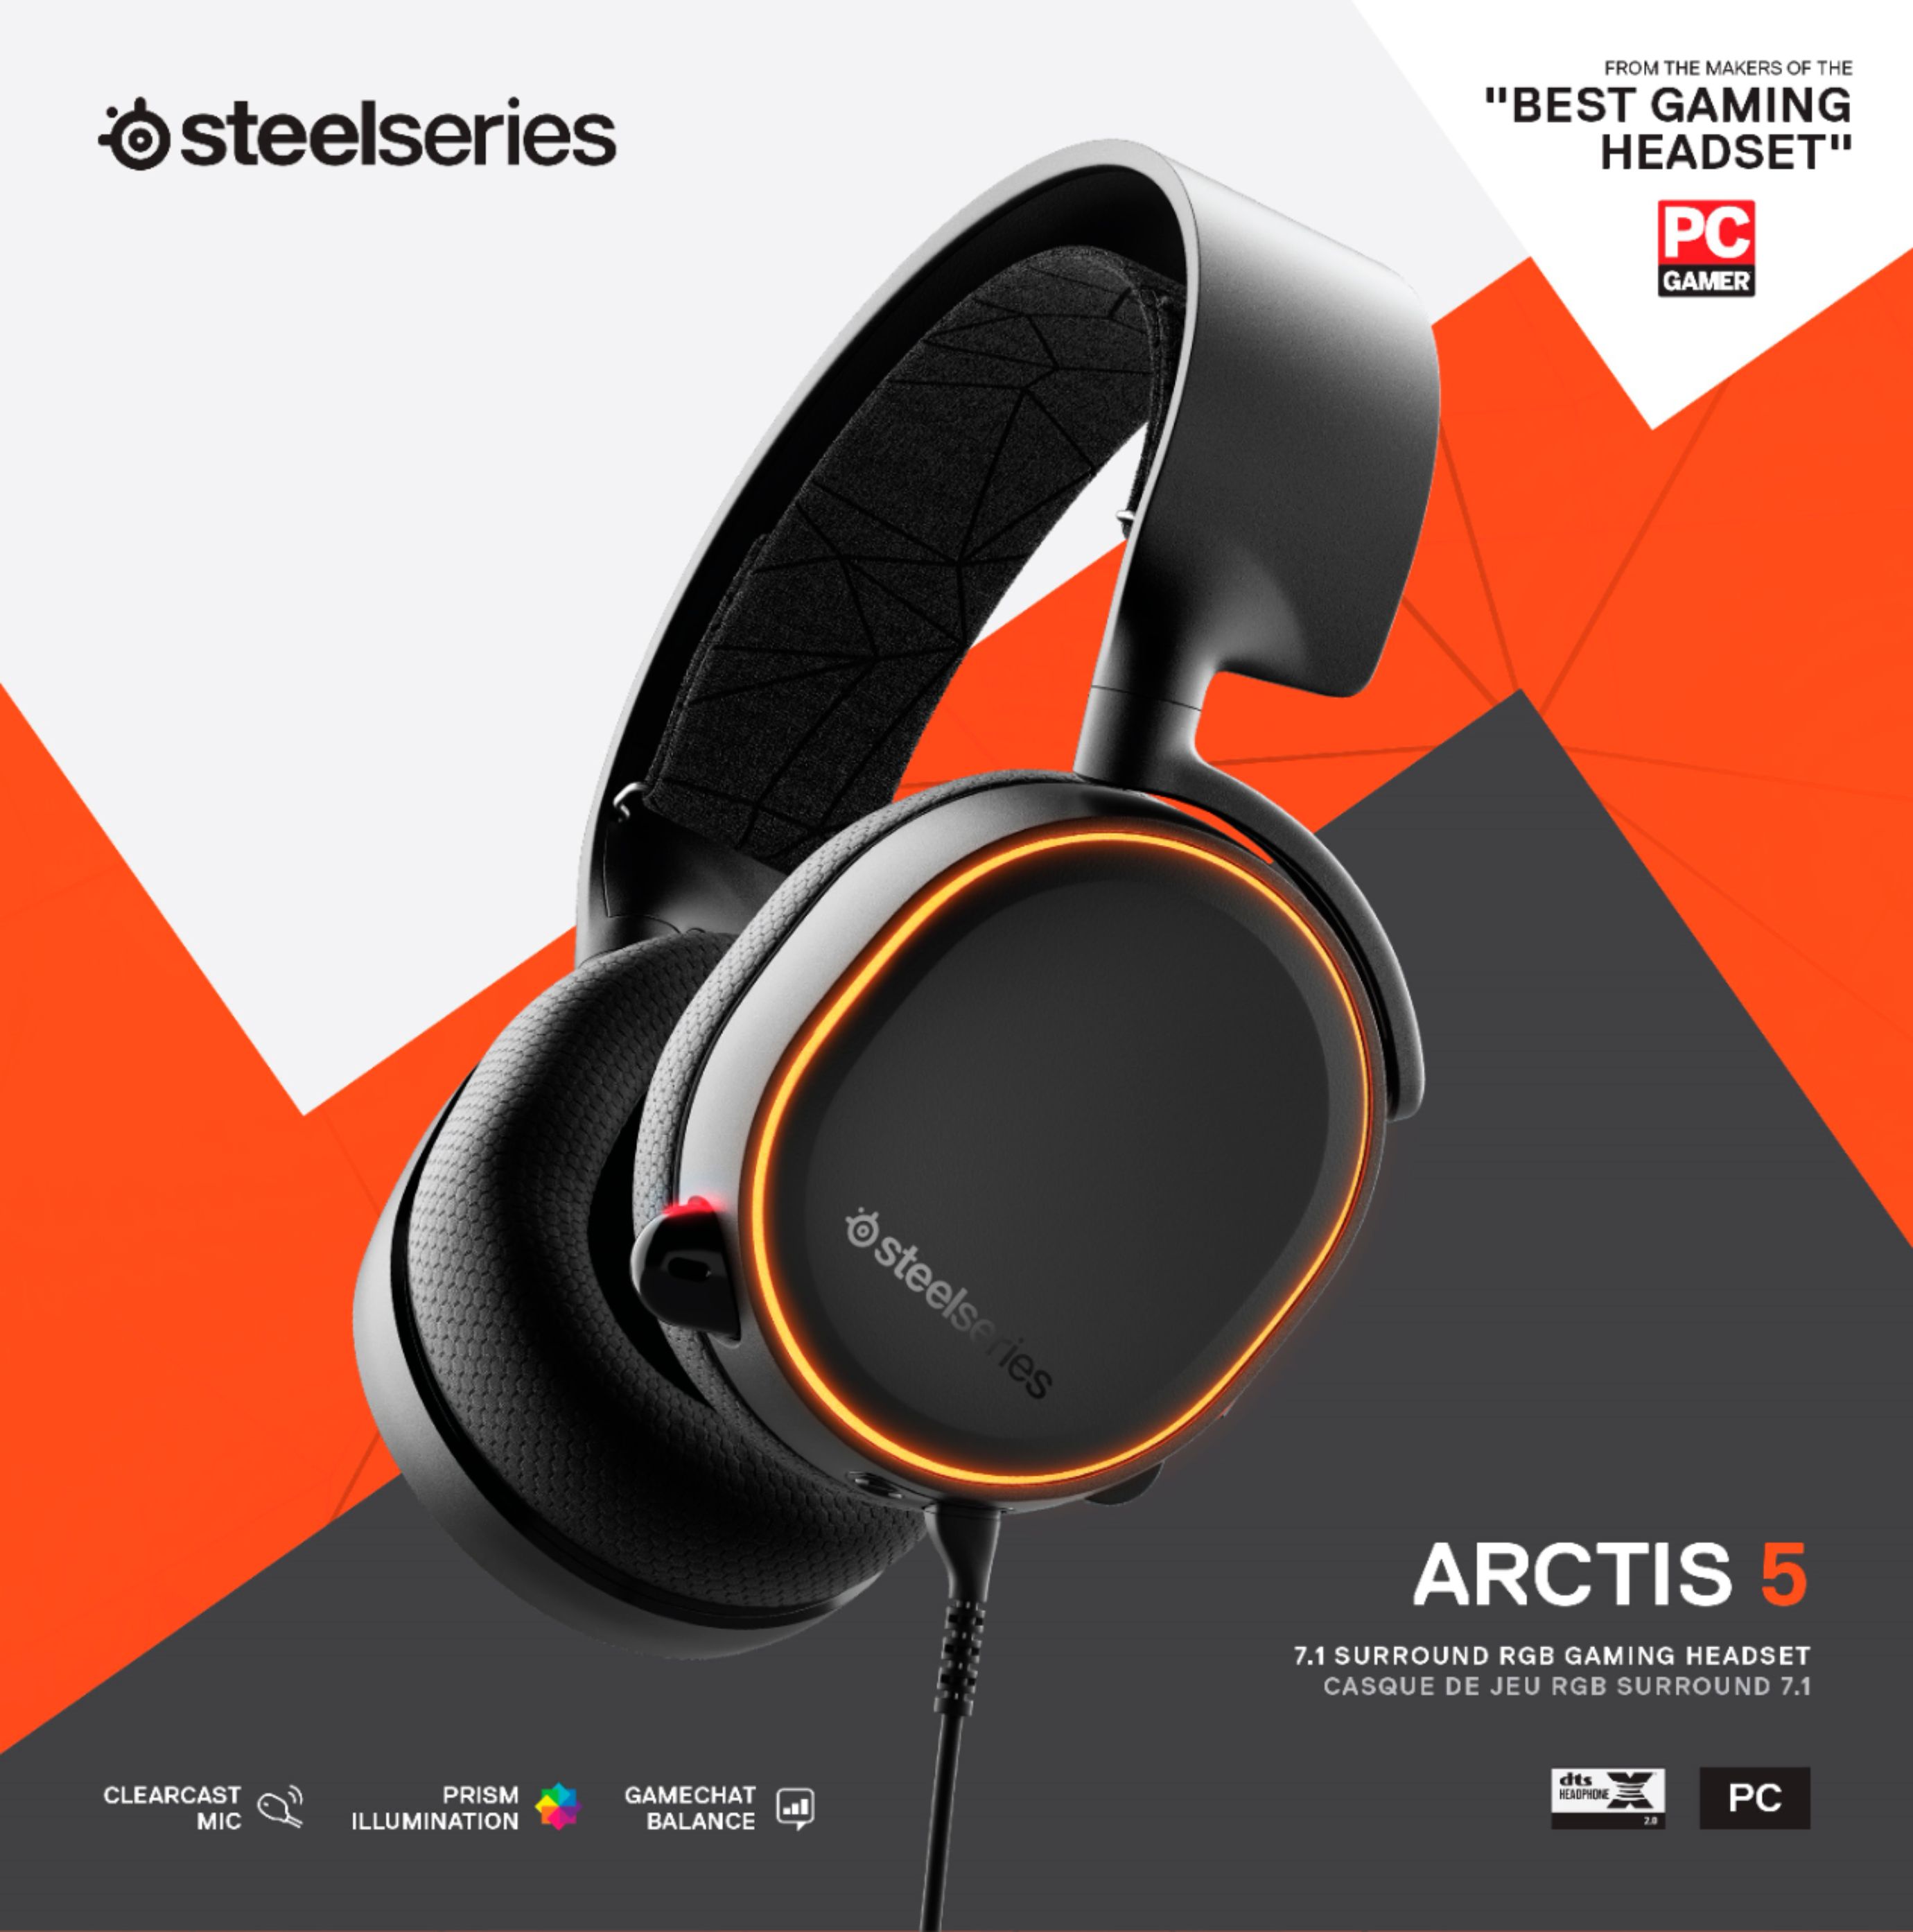 RGB Illumination DTS Headphone:X v2.0 Surround for PC and PlayStation 4 2019 Edition Gaming Headset SteelSeries Arctis 5 White